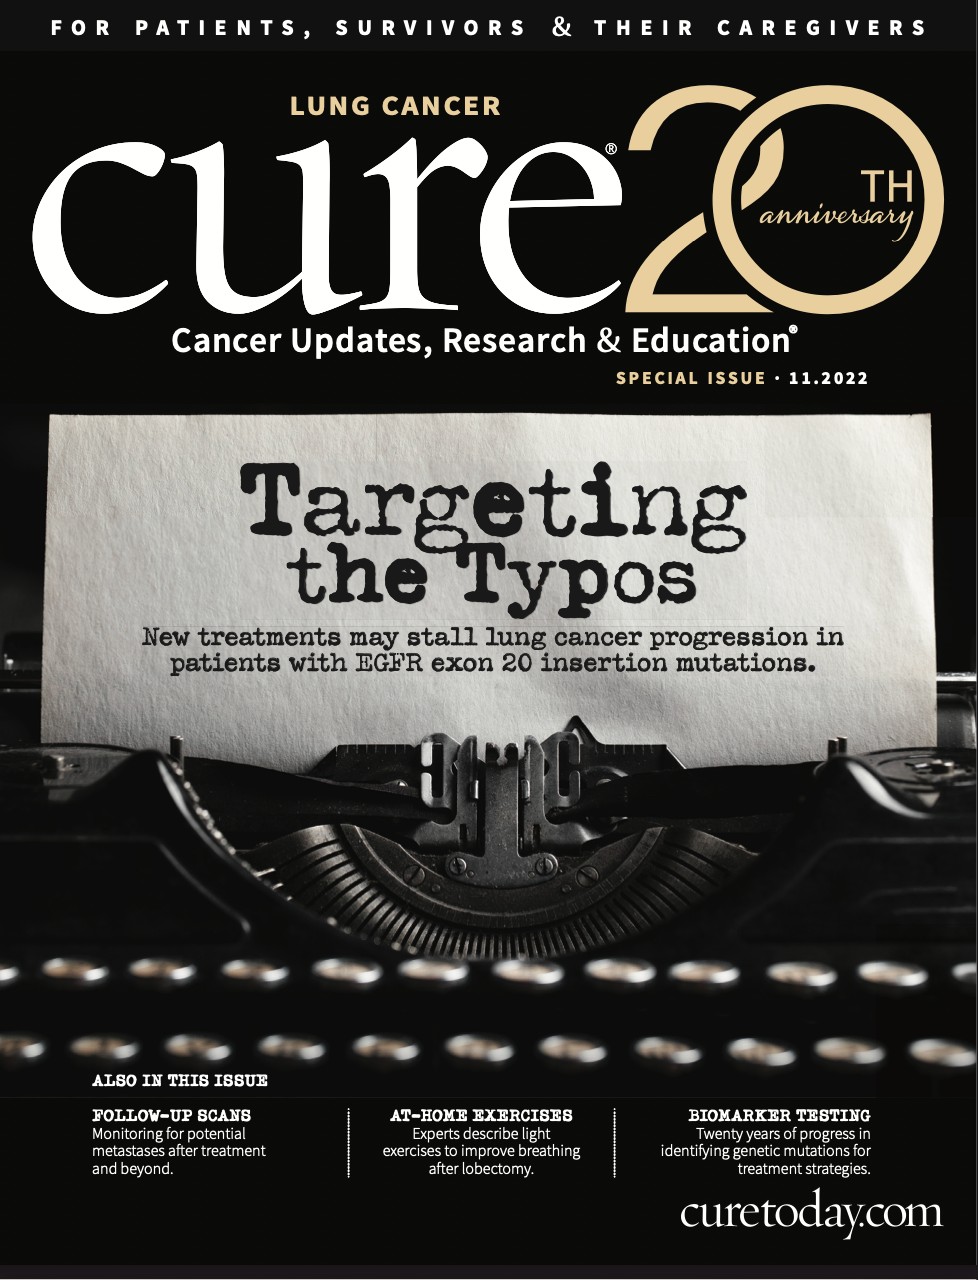 Cover of the CURE Lung Cancer Special Issue, featuring a typewriter with a paper coming out that reads, "Targeting the Typos"